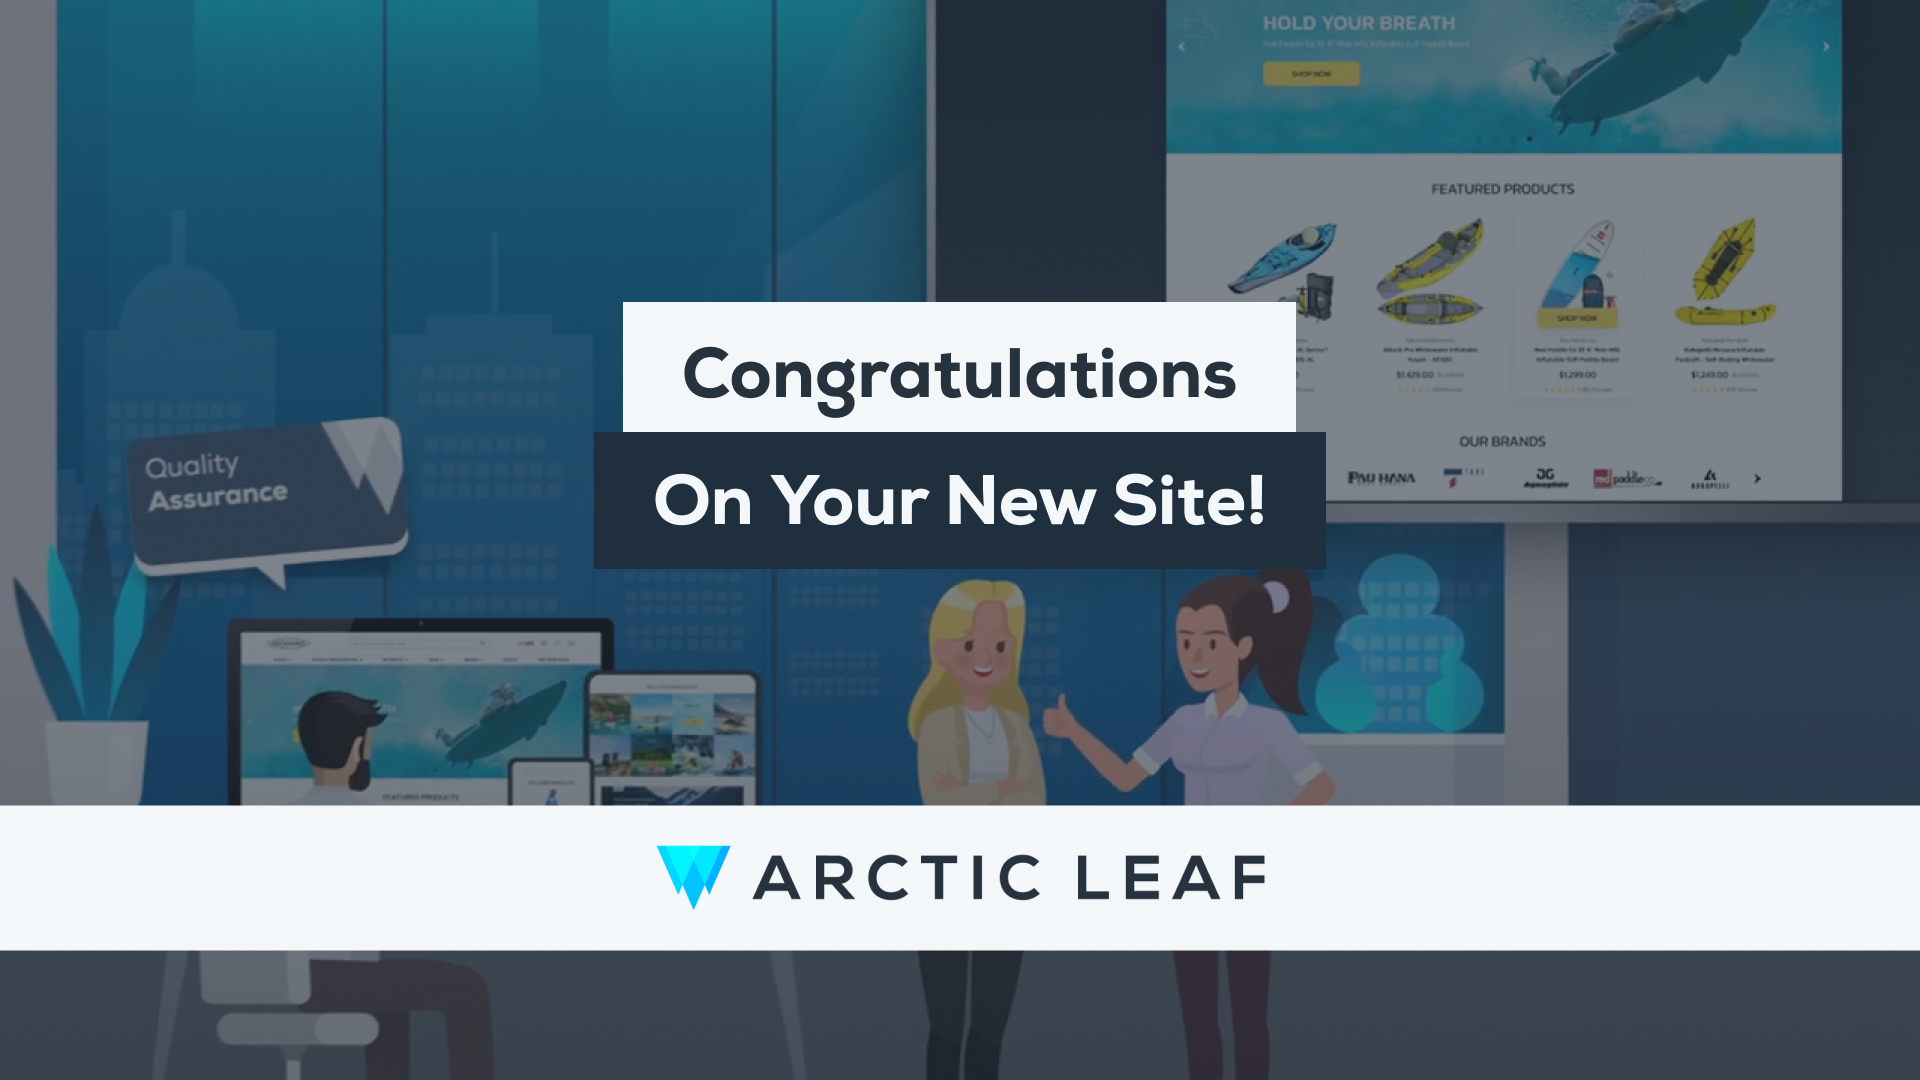 Congratulations on Your New Site